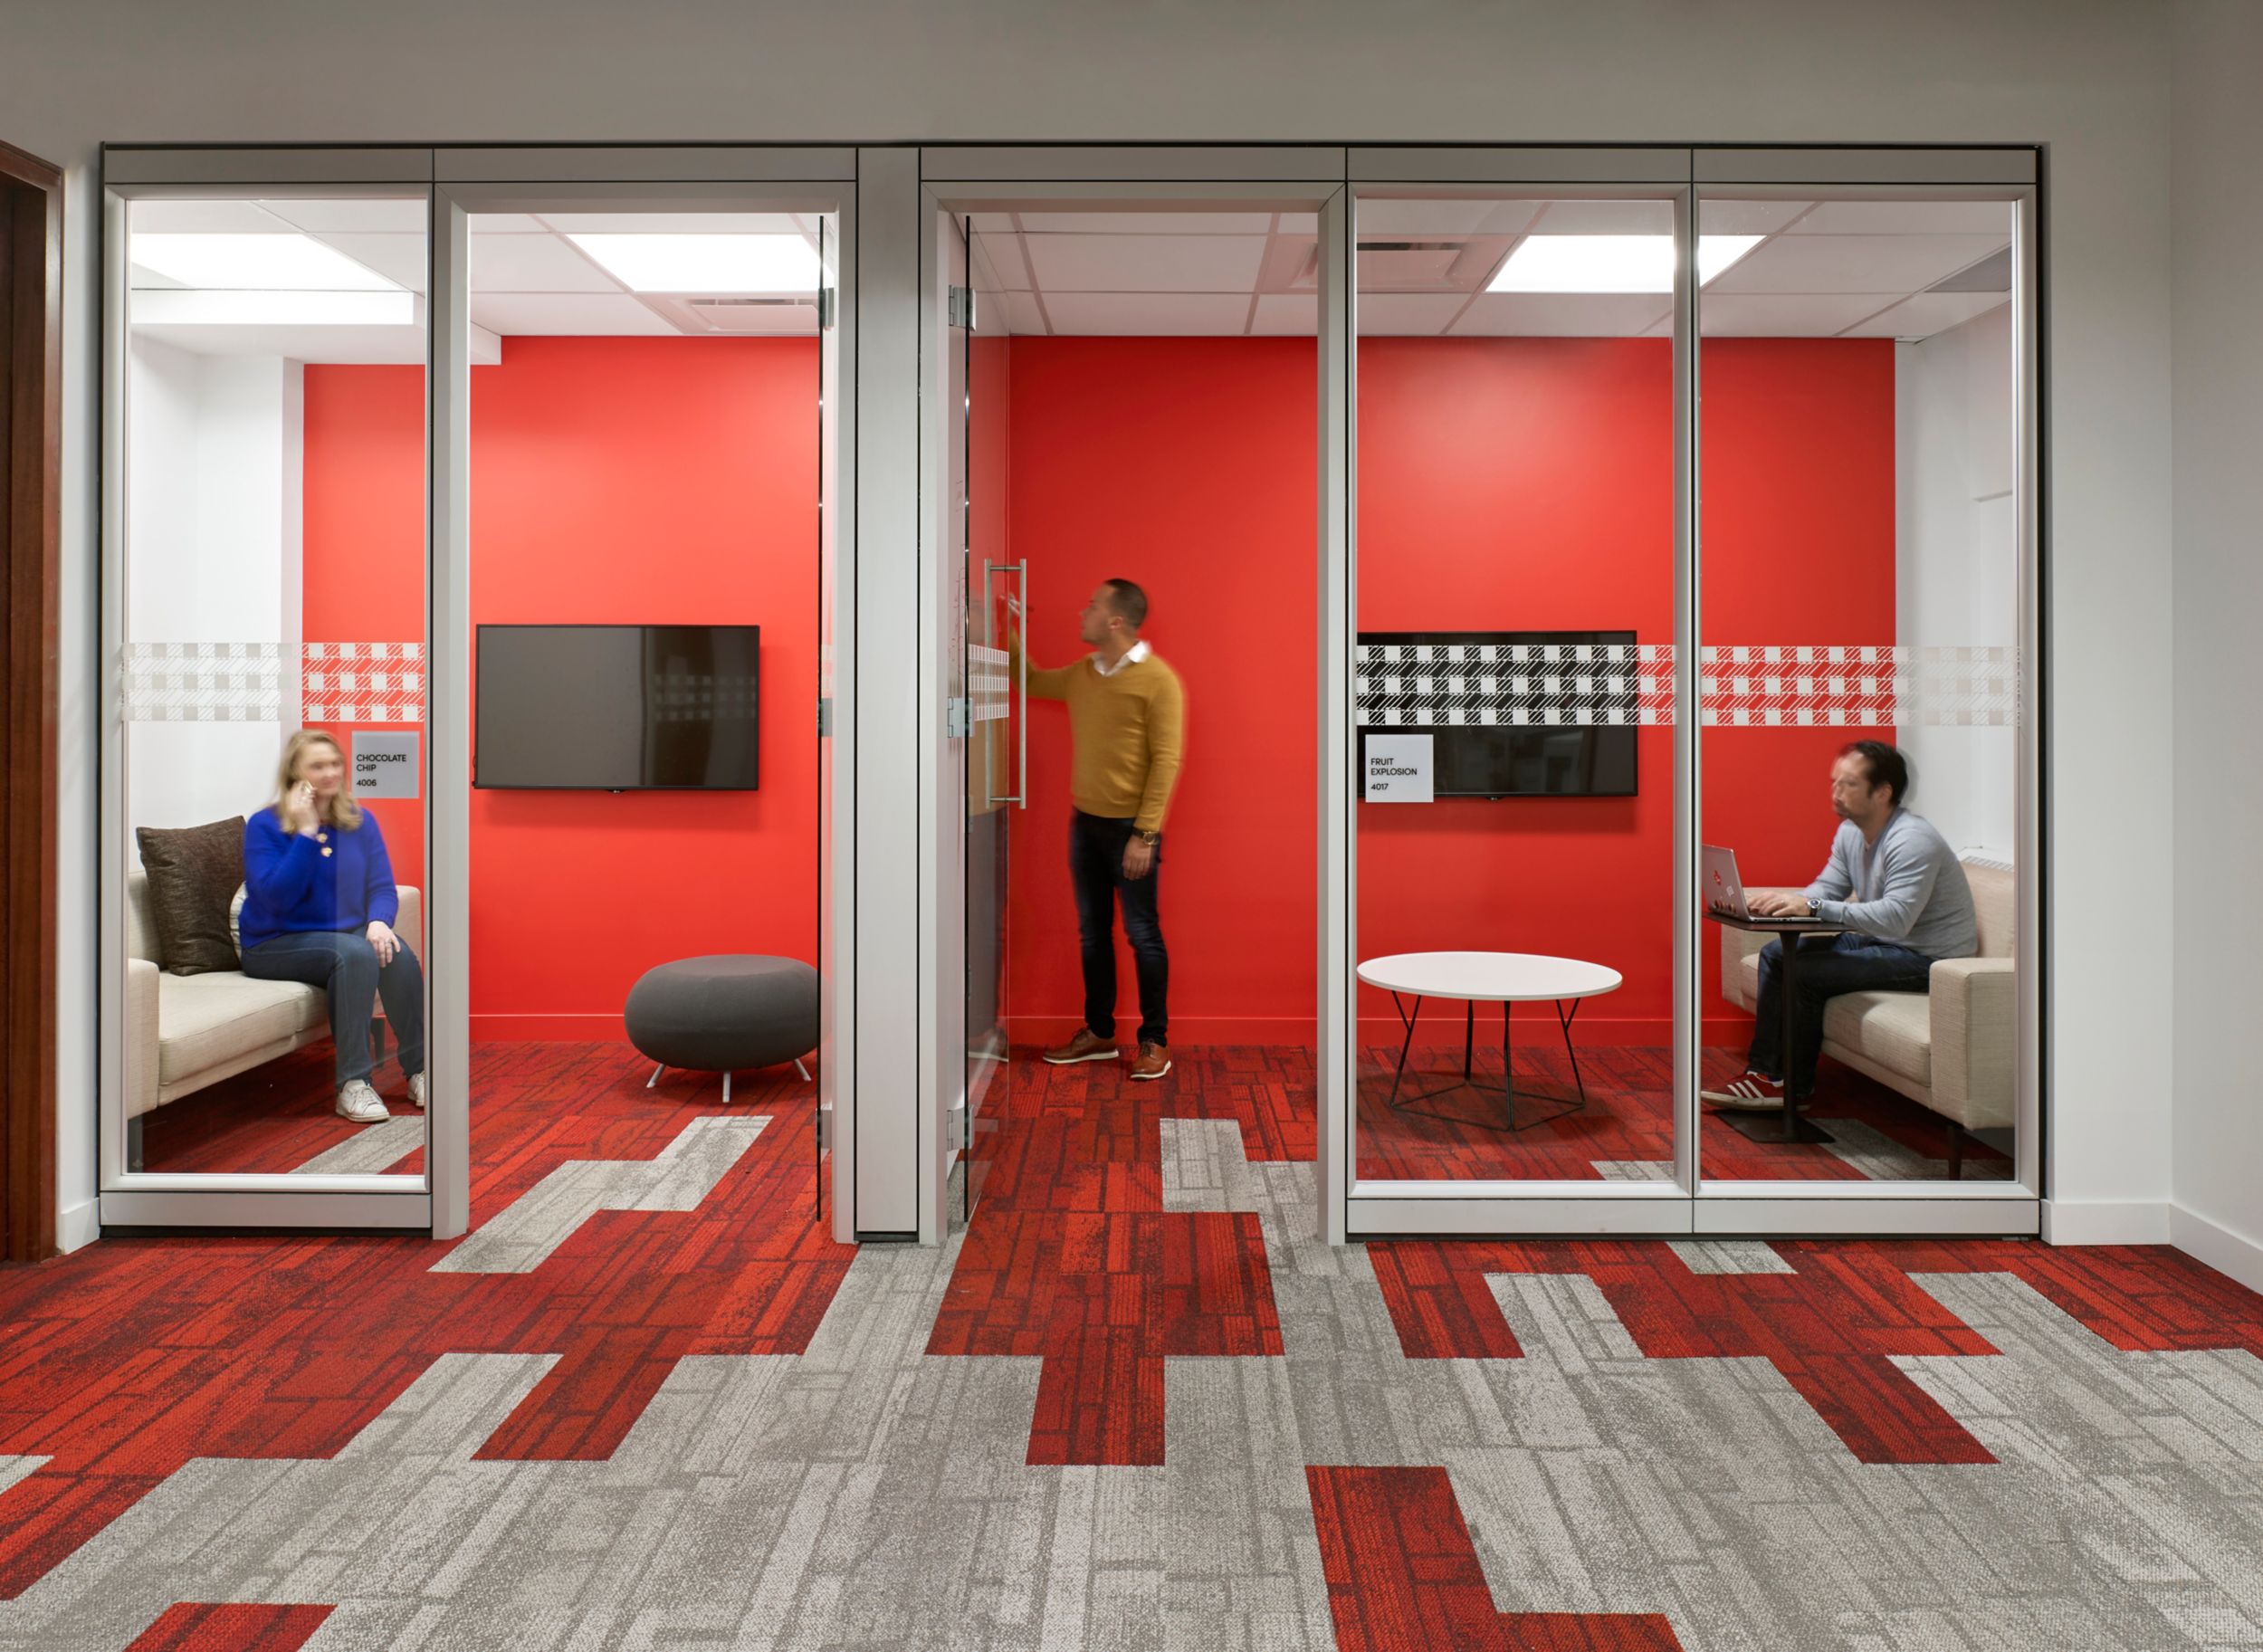 Interface Neighborhood Blocks plank carpet tile in office corridor and small meeting rooms with people working imagen número 11